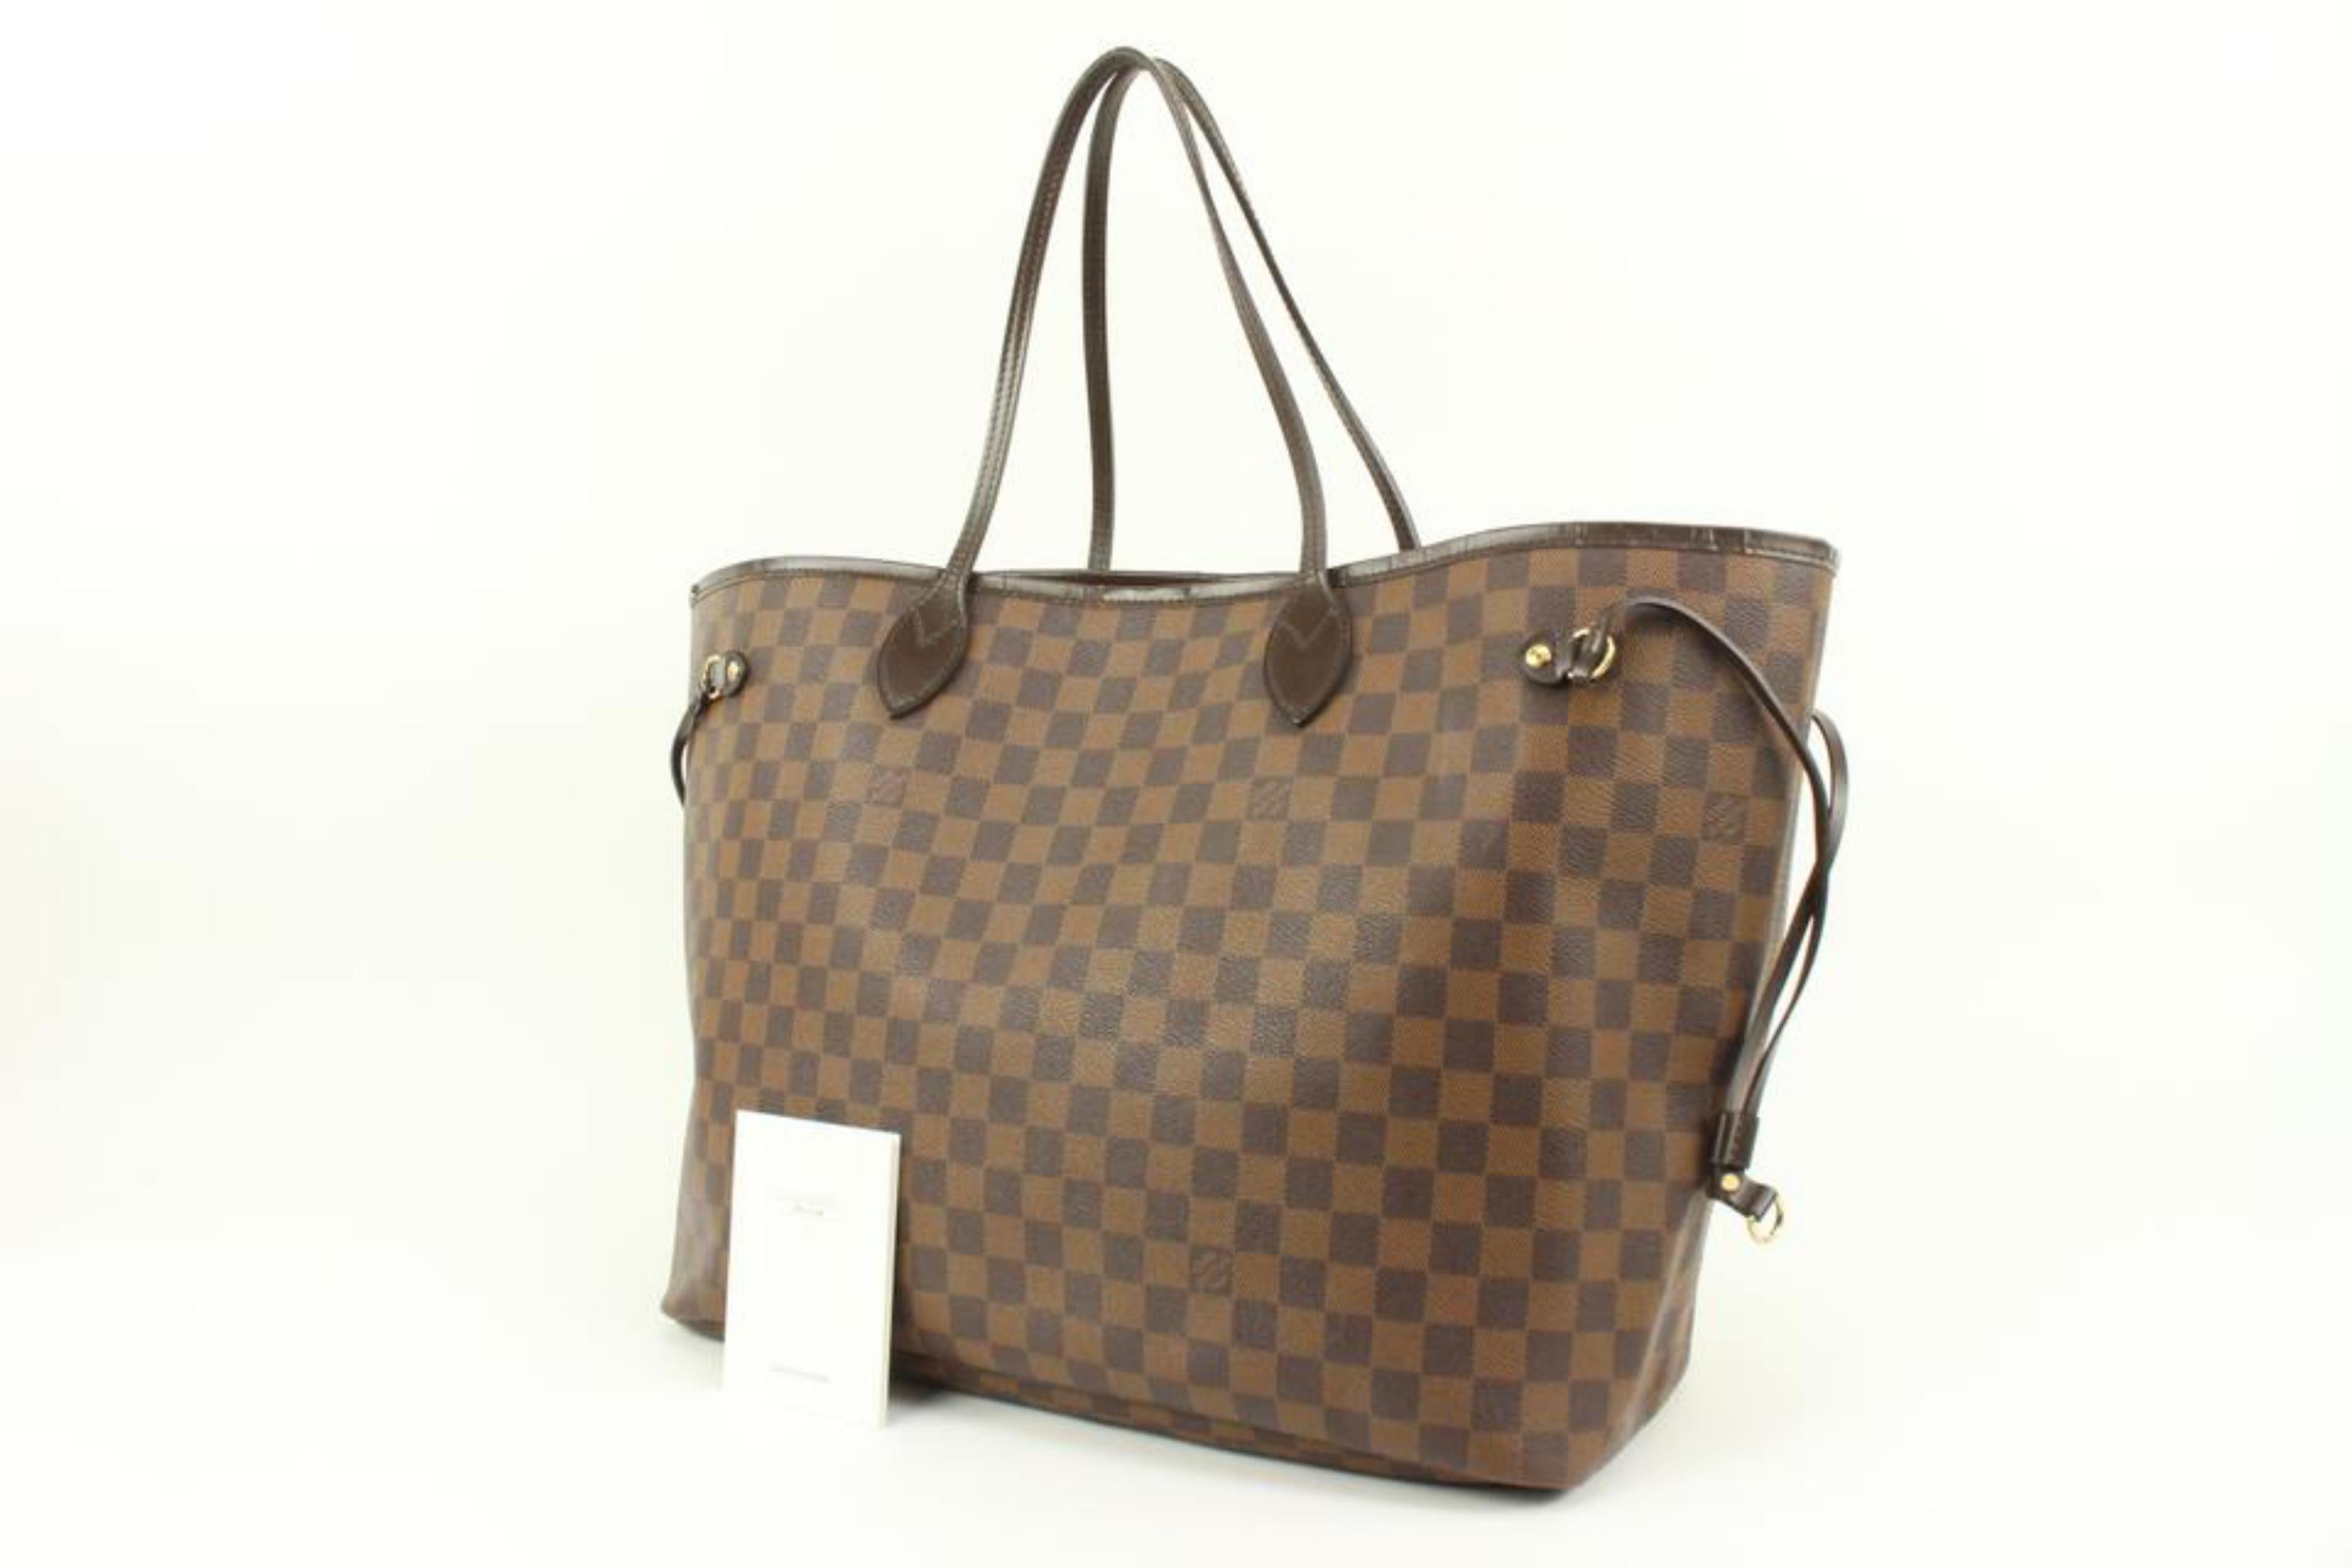 Louis Vuitton Large Damier Ebene Neverfull GM Tote Bag 6lv34s
Date Code/Serial Number: FL3100
Made In: France
Measurements: Length:  21.5